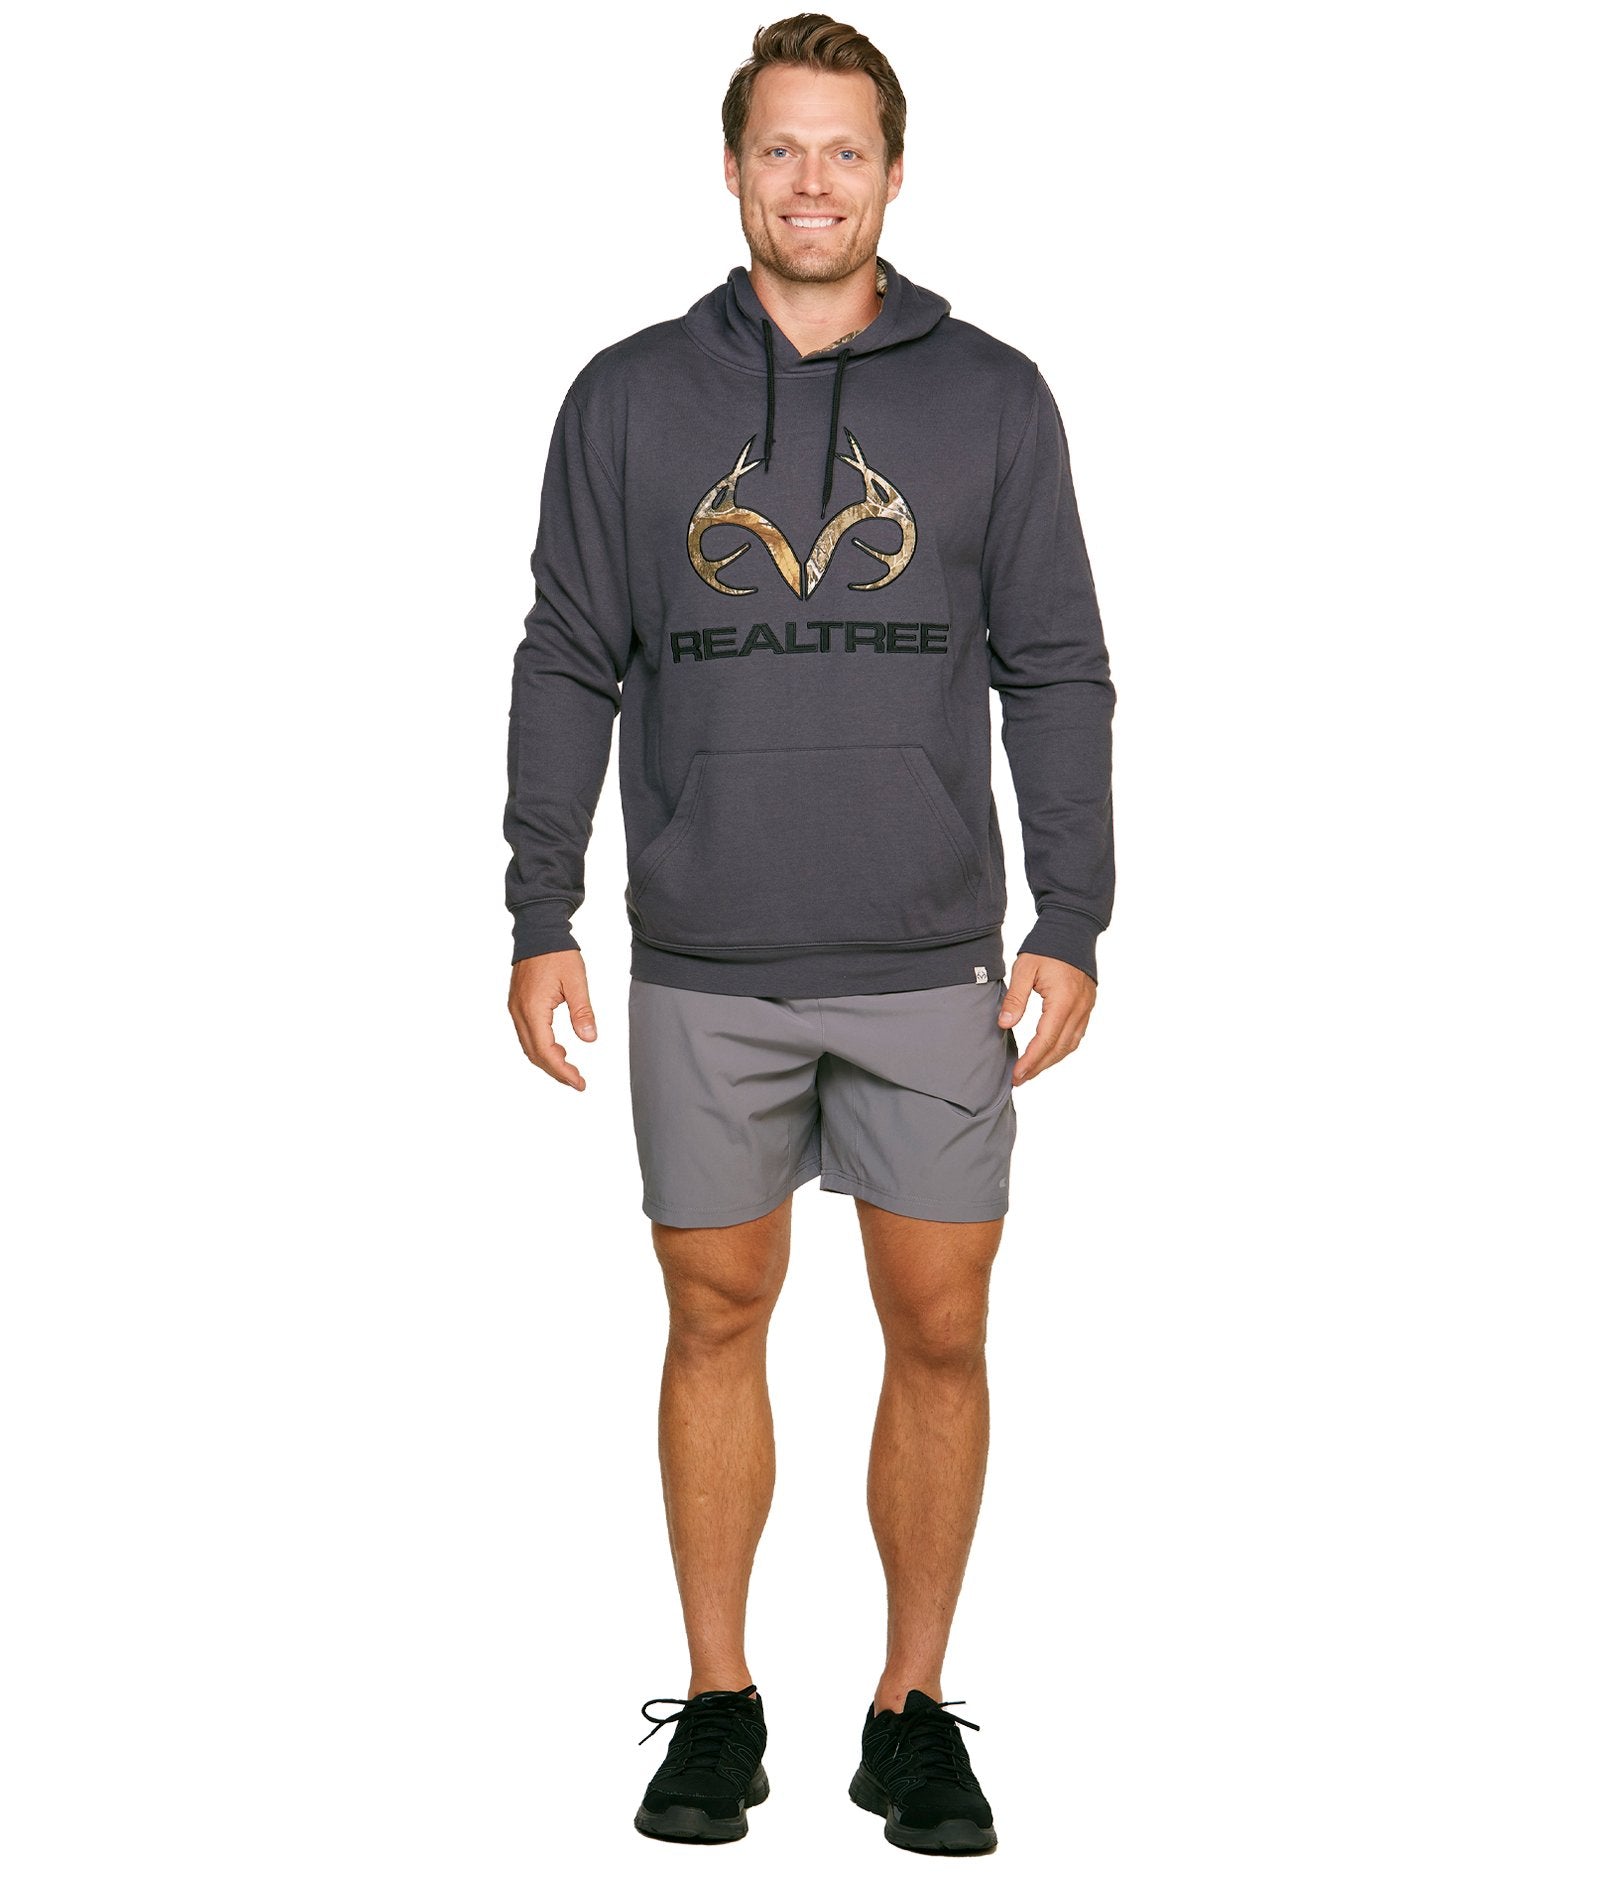 Men's Realtree Charcoal Grizzly Pullover Hoodie